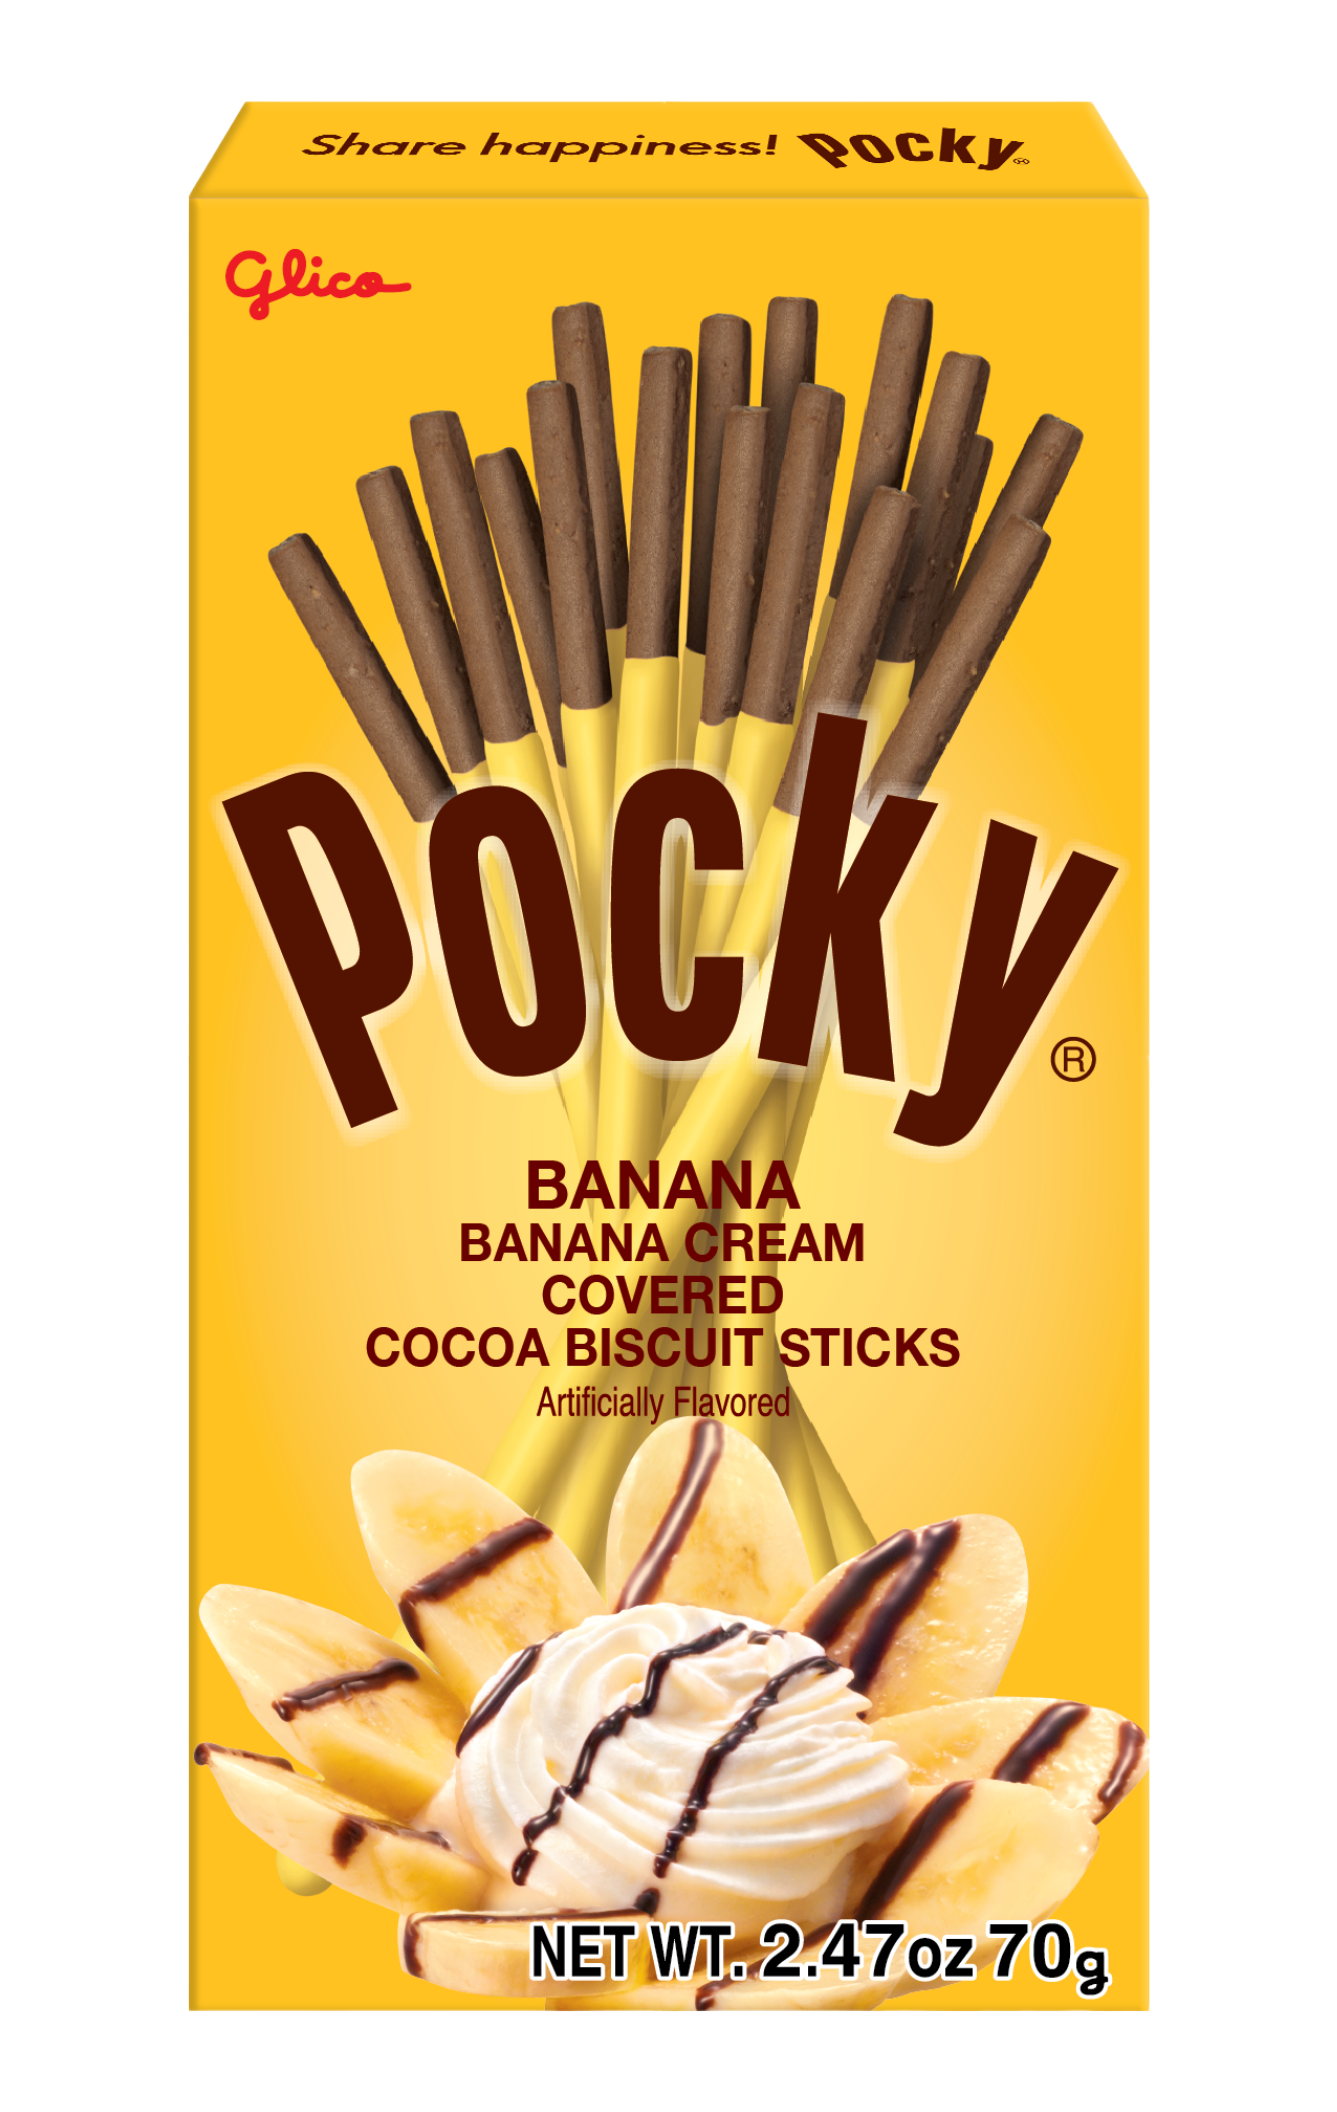 https://www.pocky.com/wp-content/uploads/2022/11/My-project-1.png